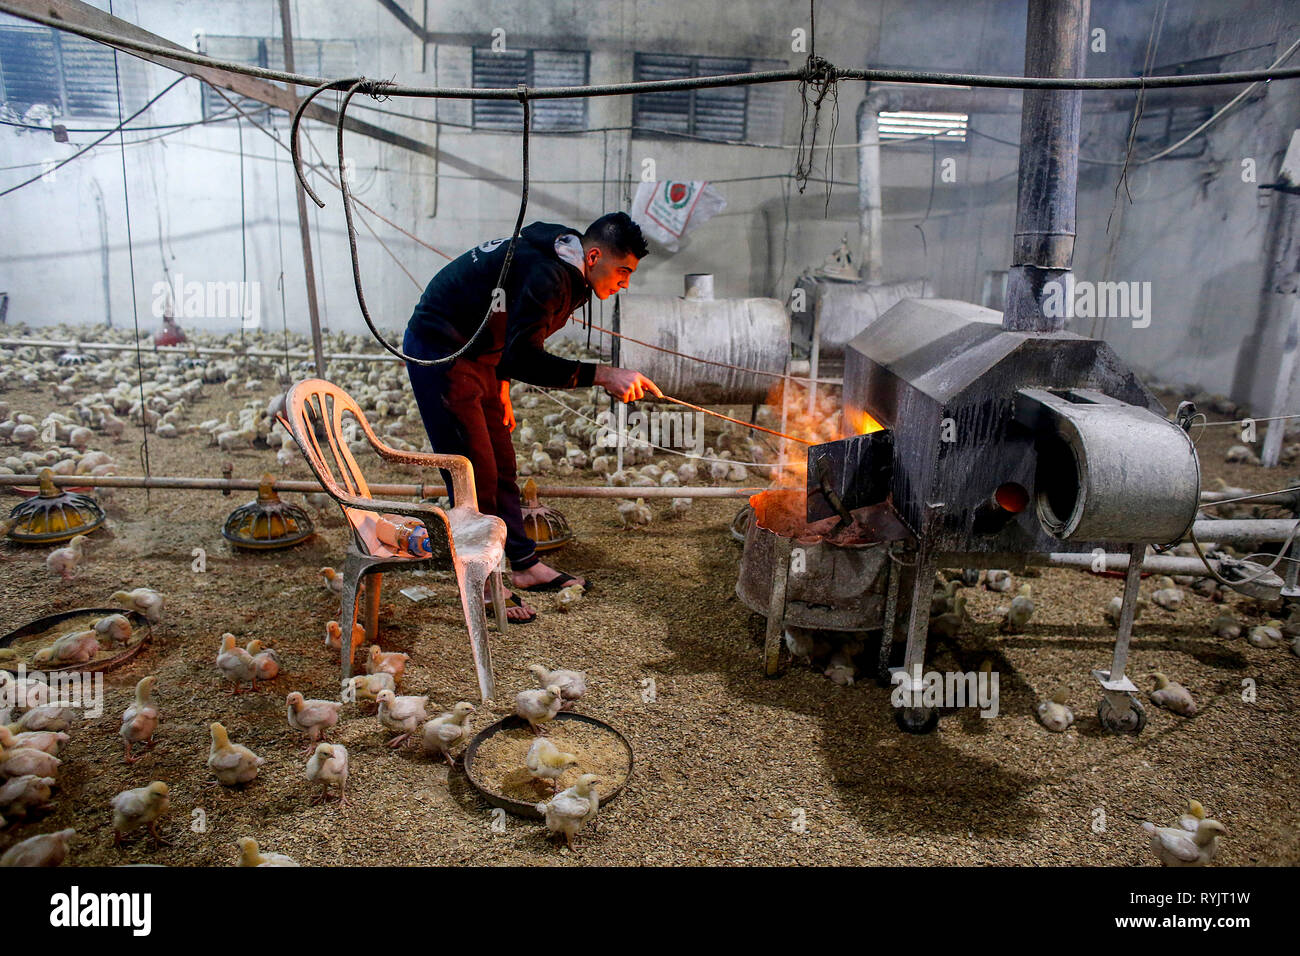 Qais Mahmoud Adel Mahmoud's heated poultry farm in Beit Imrine, West Bank, Palestine, financed by a loan from ACAD Finance. Stock Photo